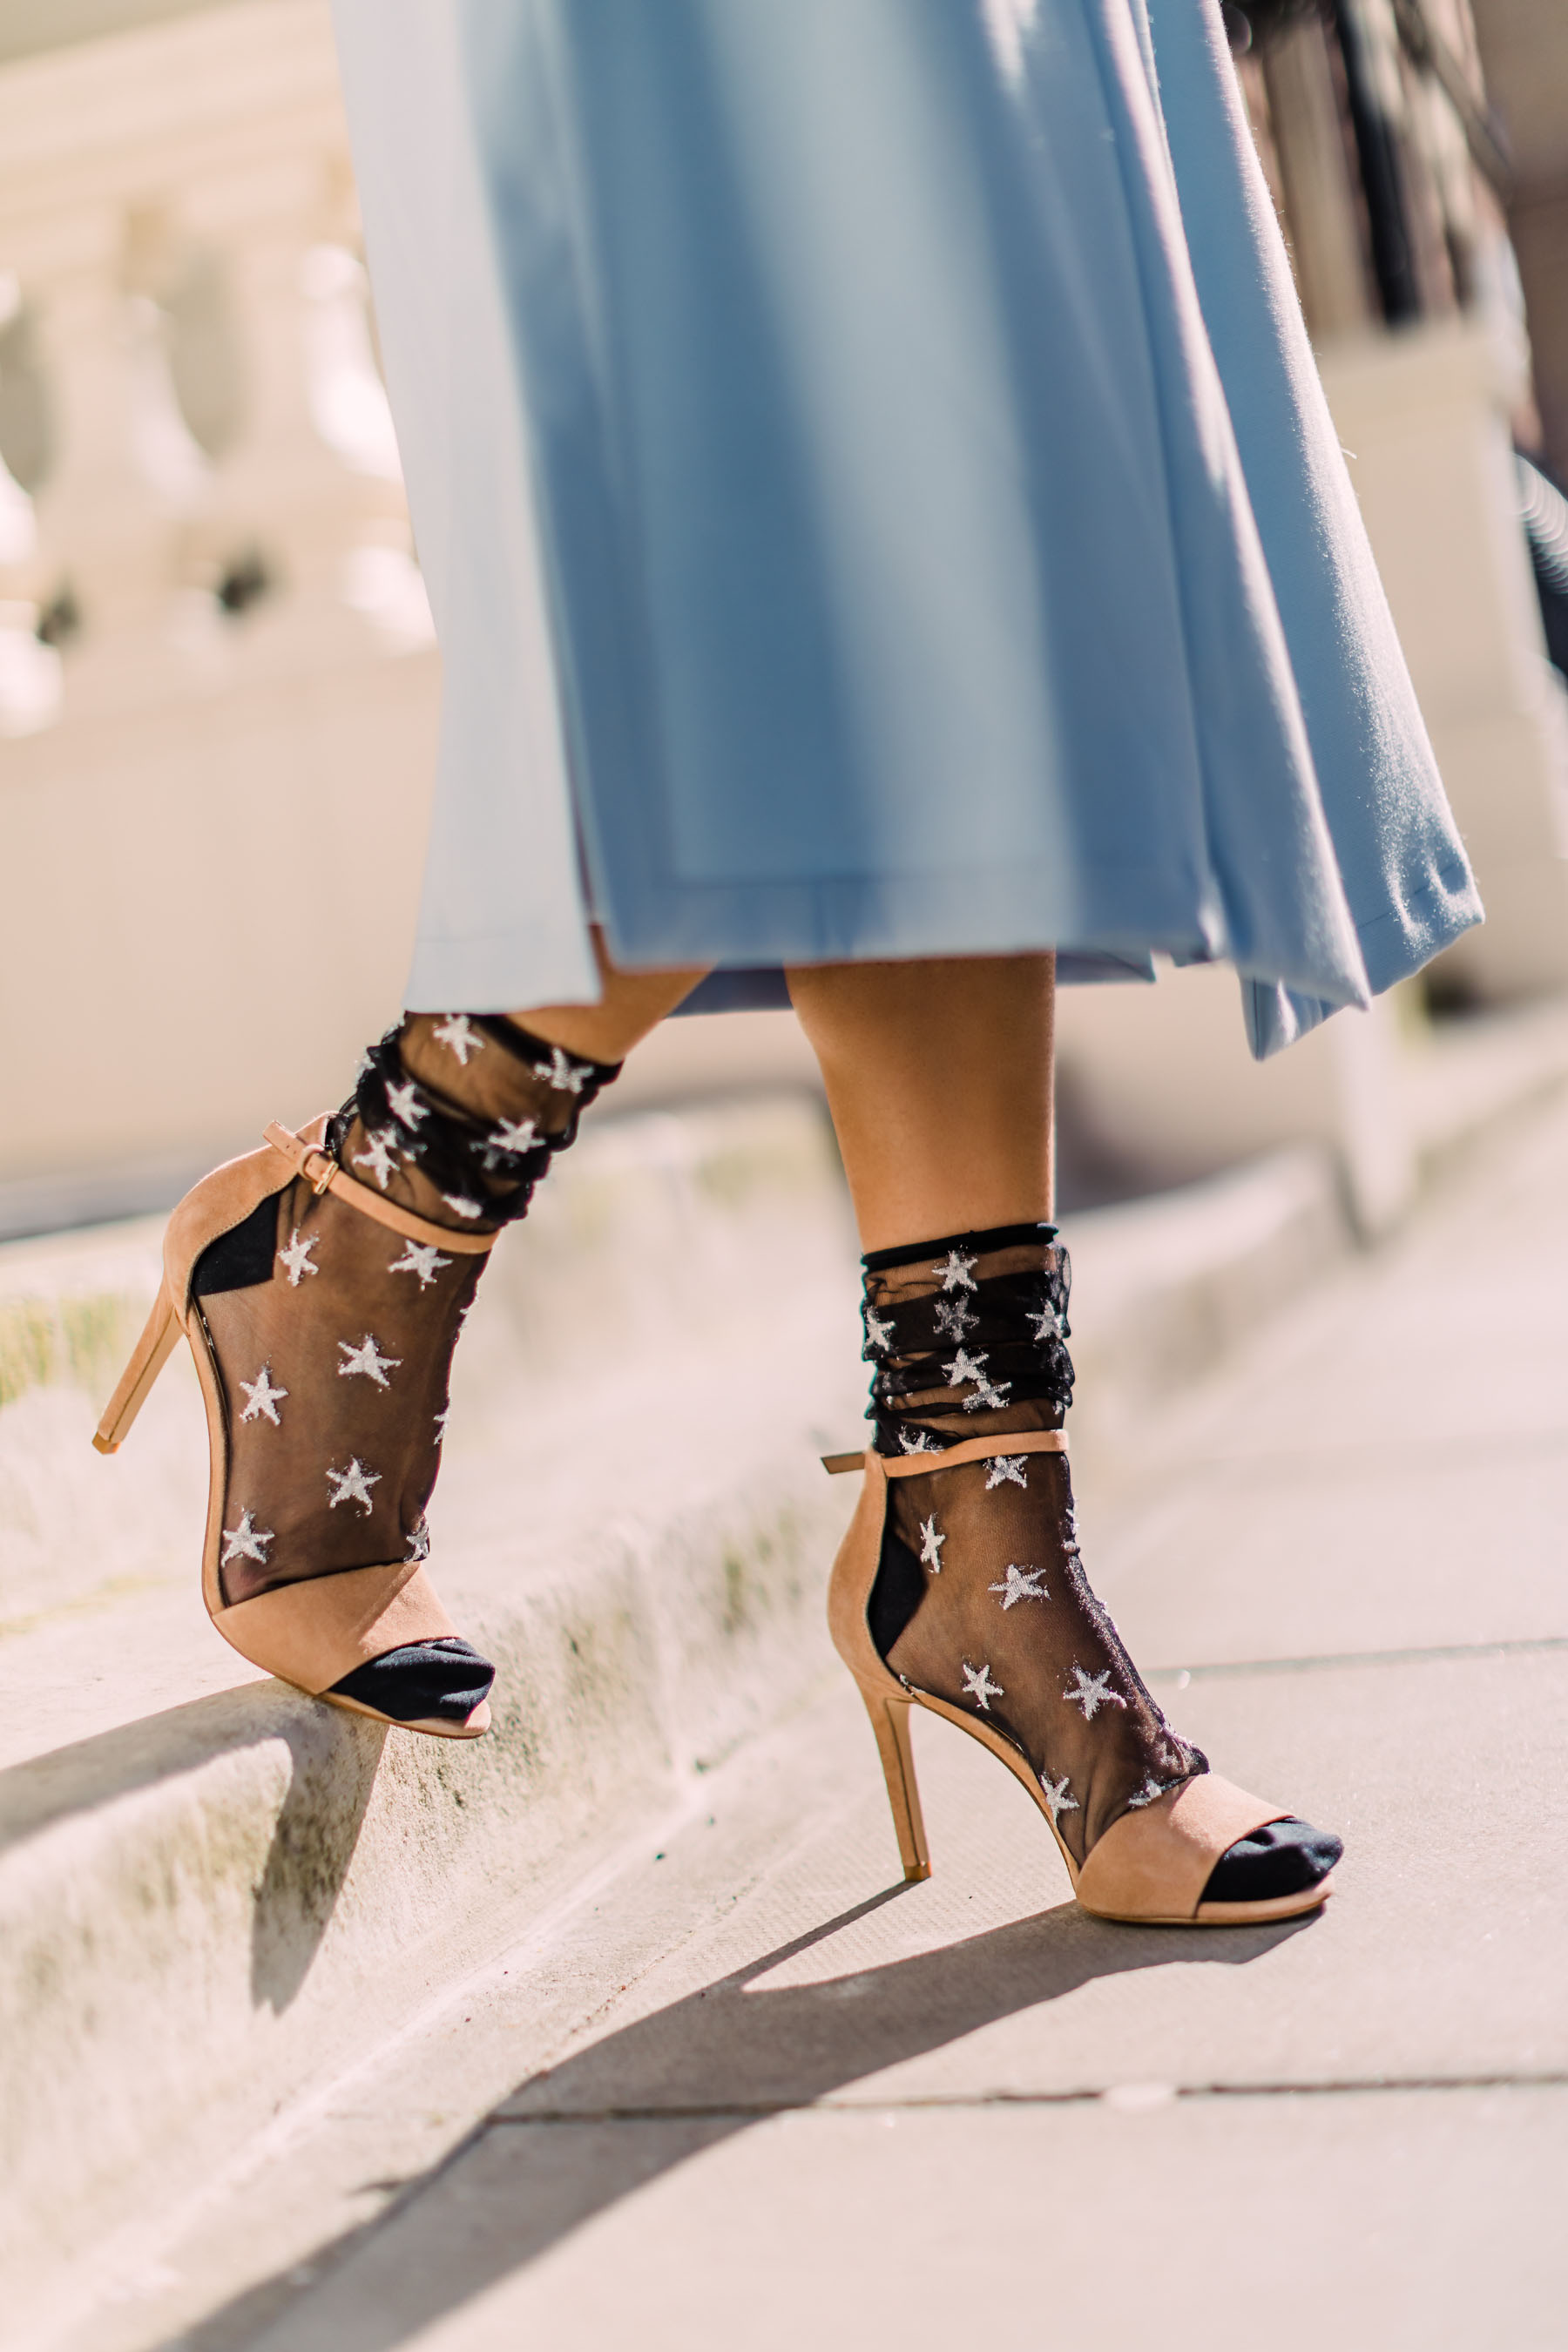 Taking It To The Streets: Socks With Heels